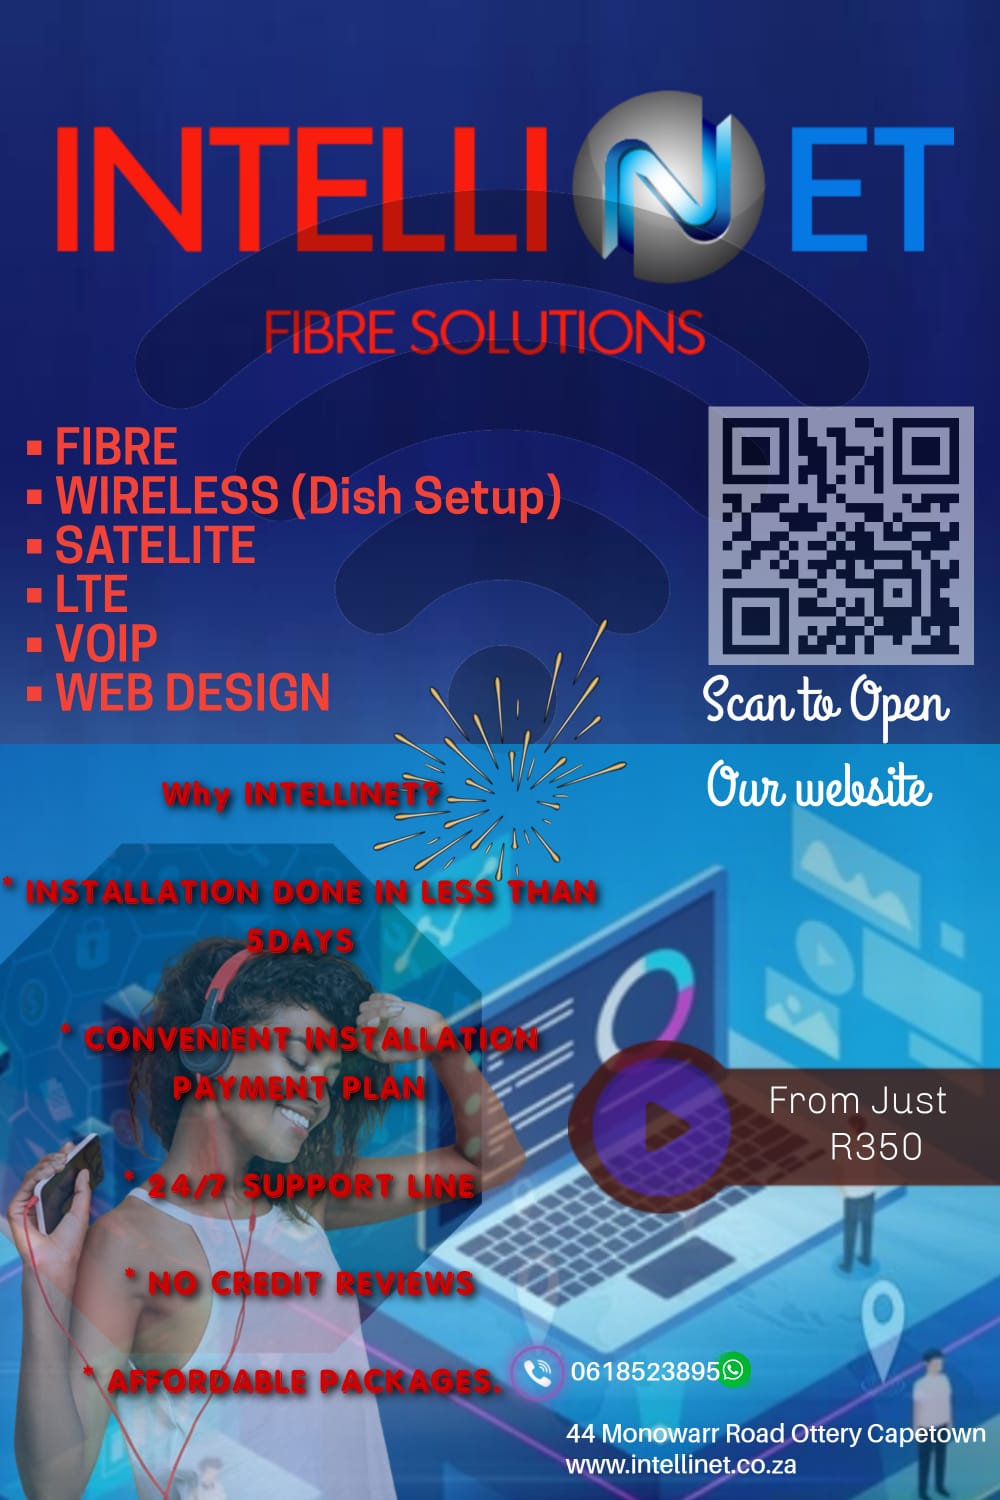 Here is how intellinet Fibre Solutions works. 